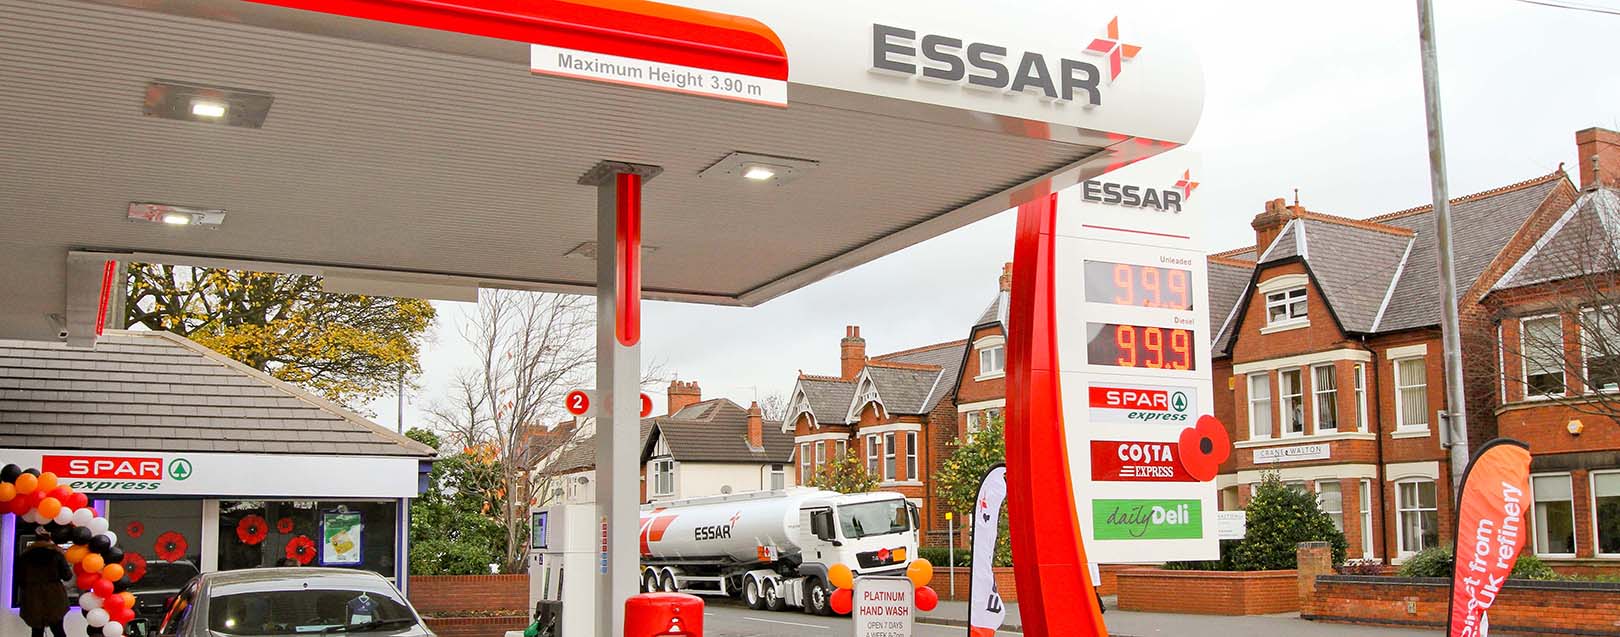 Essar Oil UK to open 400 retail outlets in 3 yrs